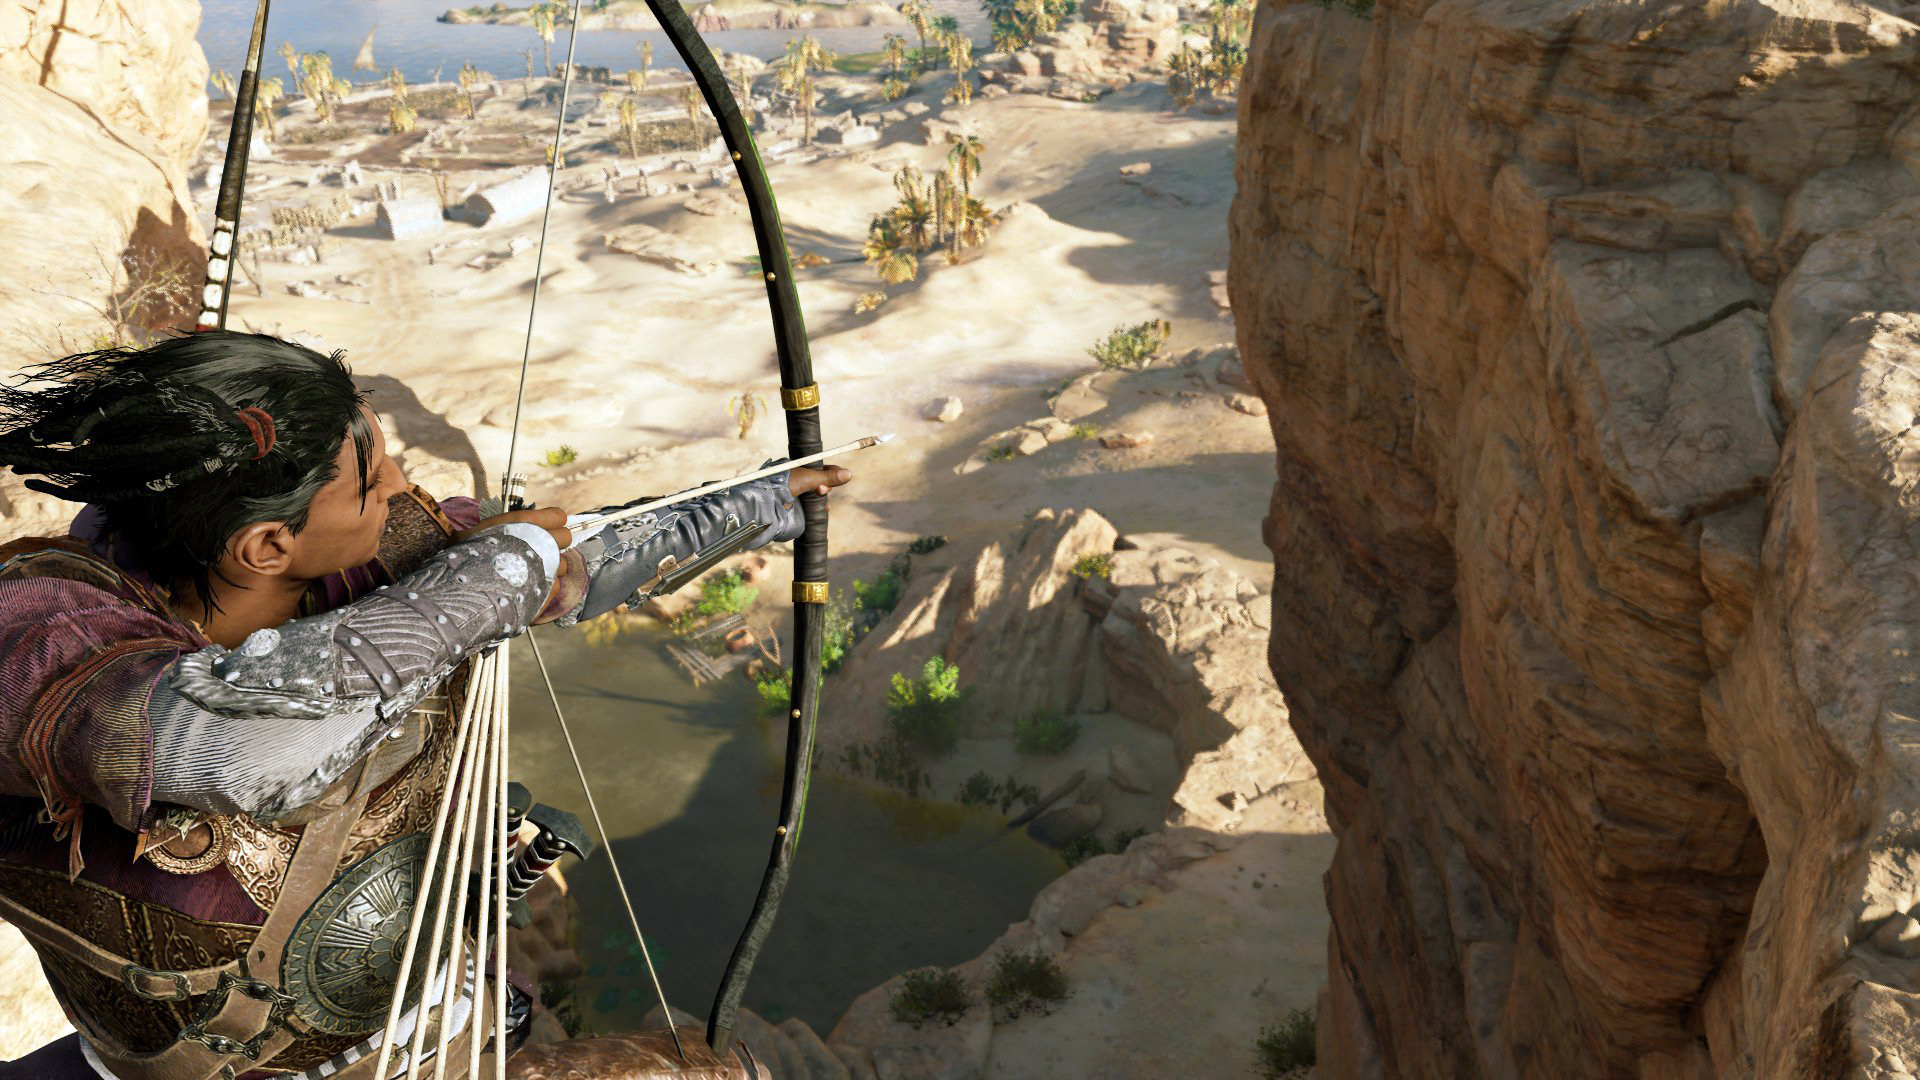 General 1920x1080 Assassin's Creed Assassin's Creed: Origins video games Bayek Egypt Ubisoft game photography bow and arrow video game characters